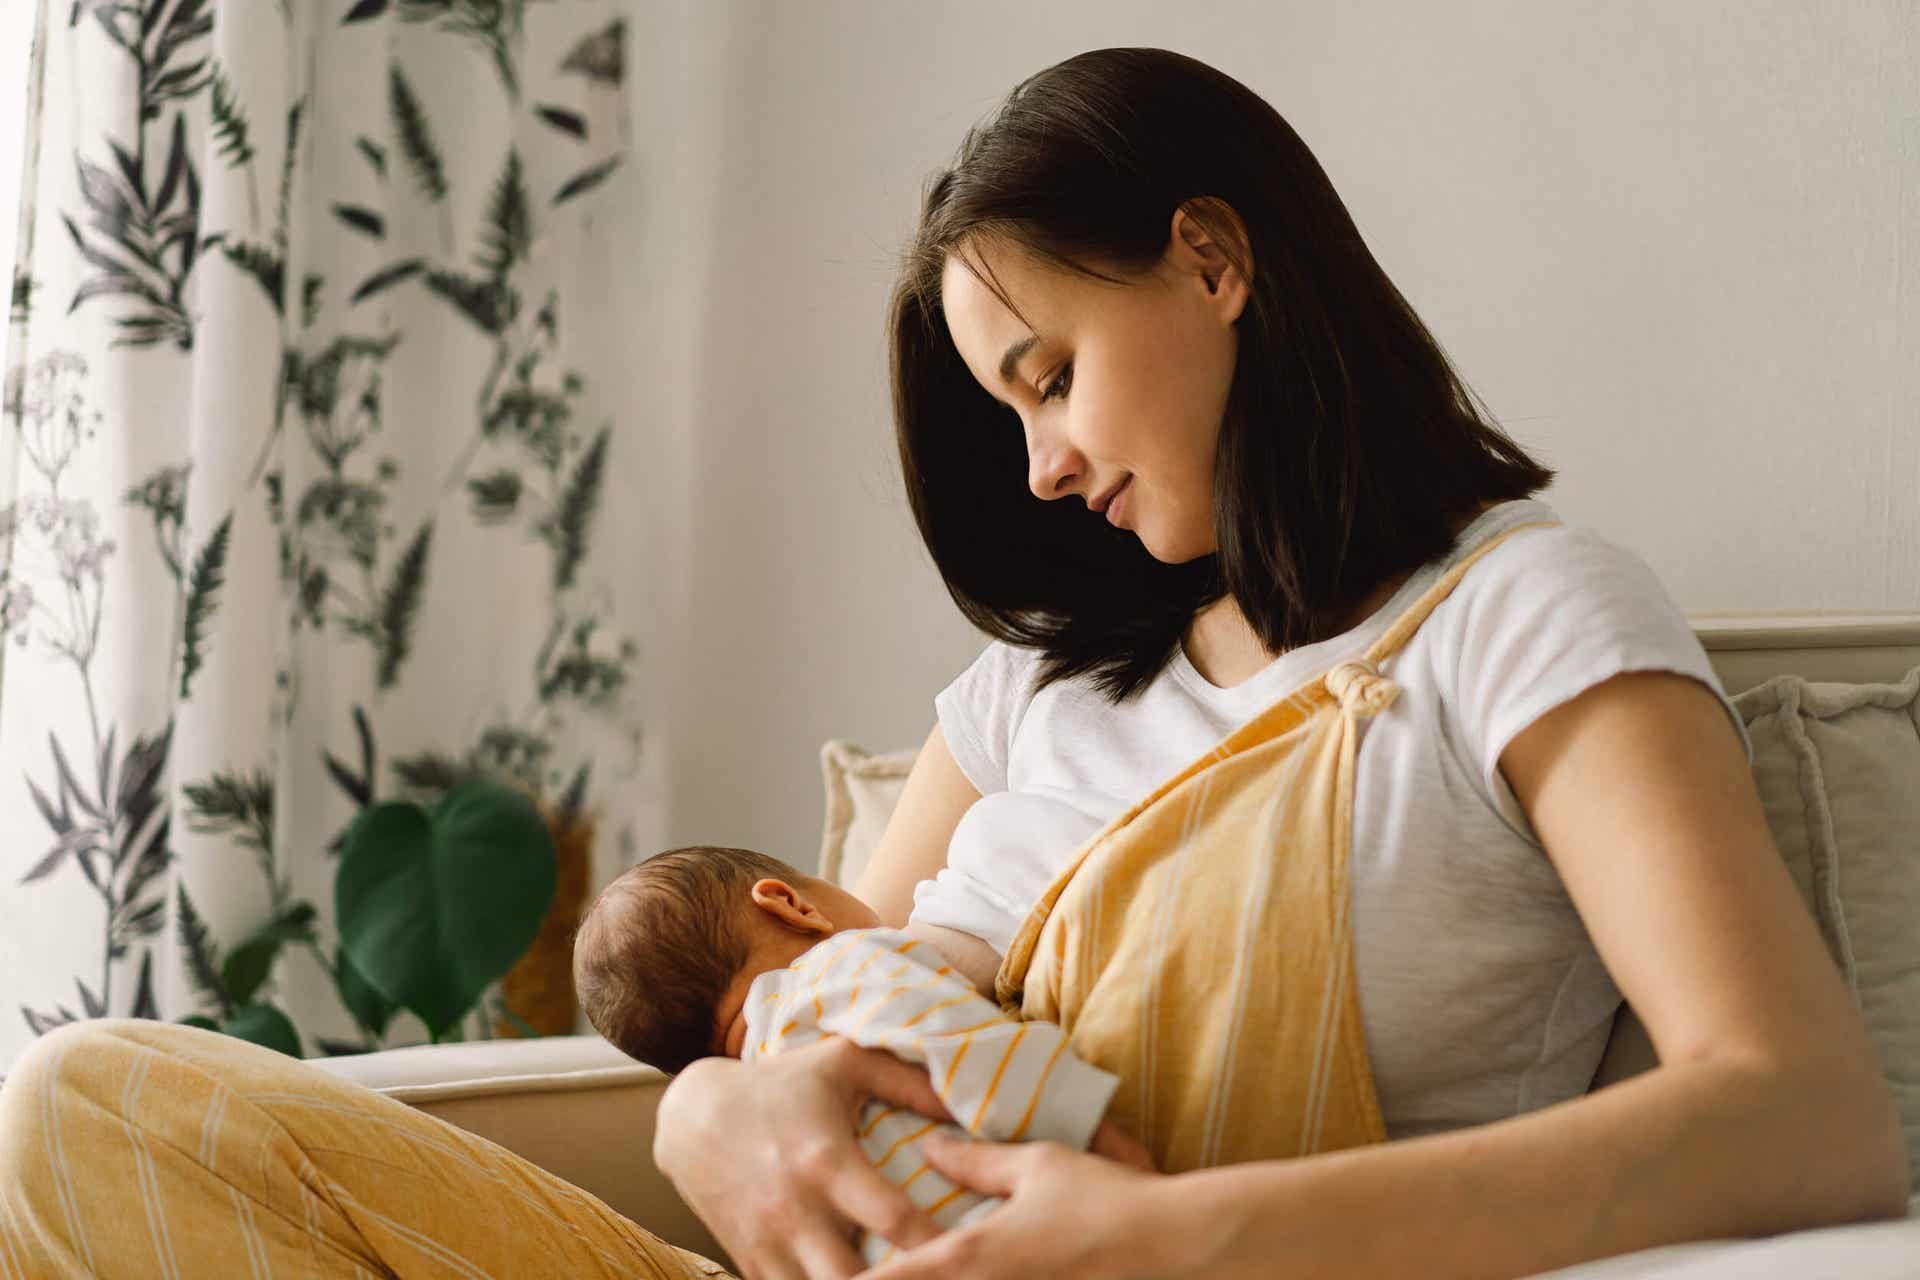 Breastfeeding can change the color of infants' stool